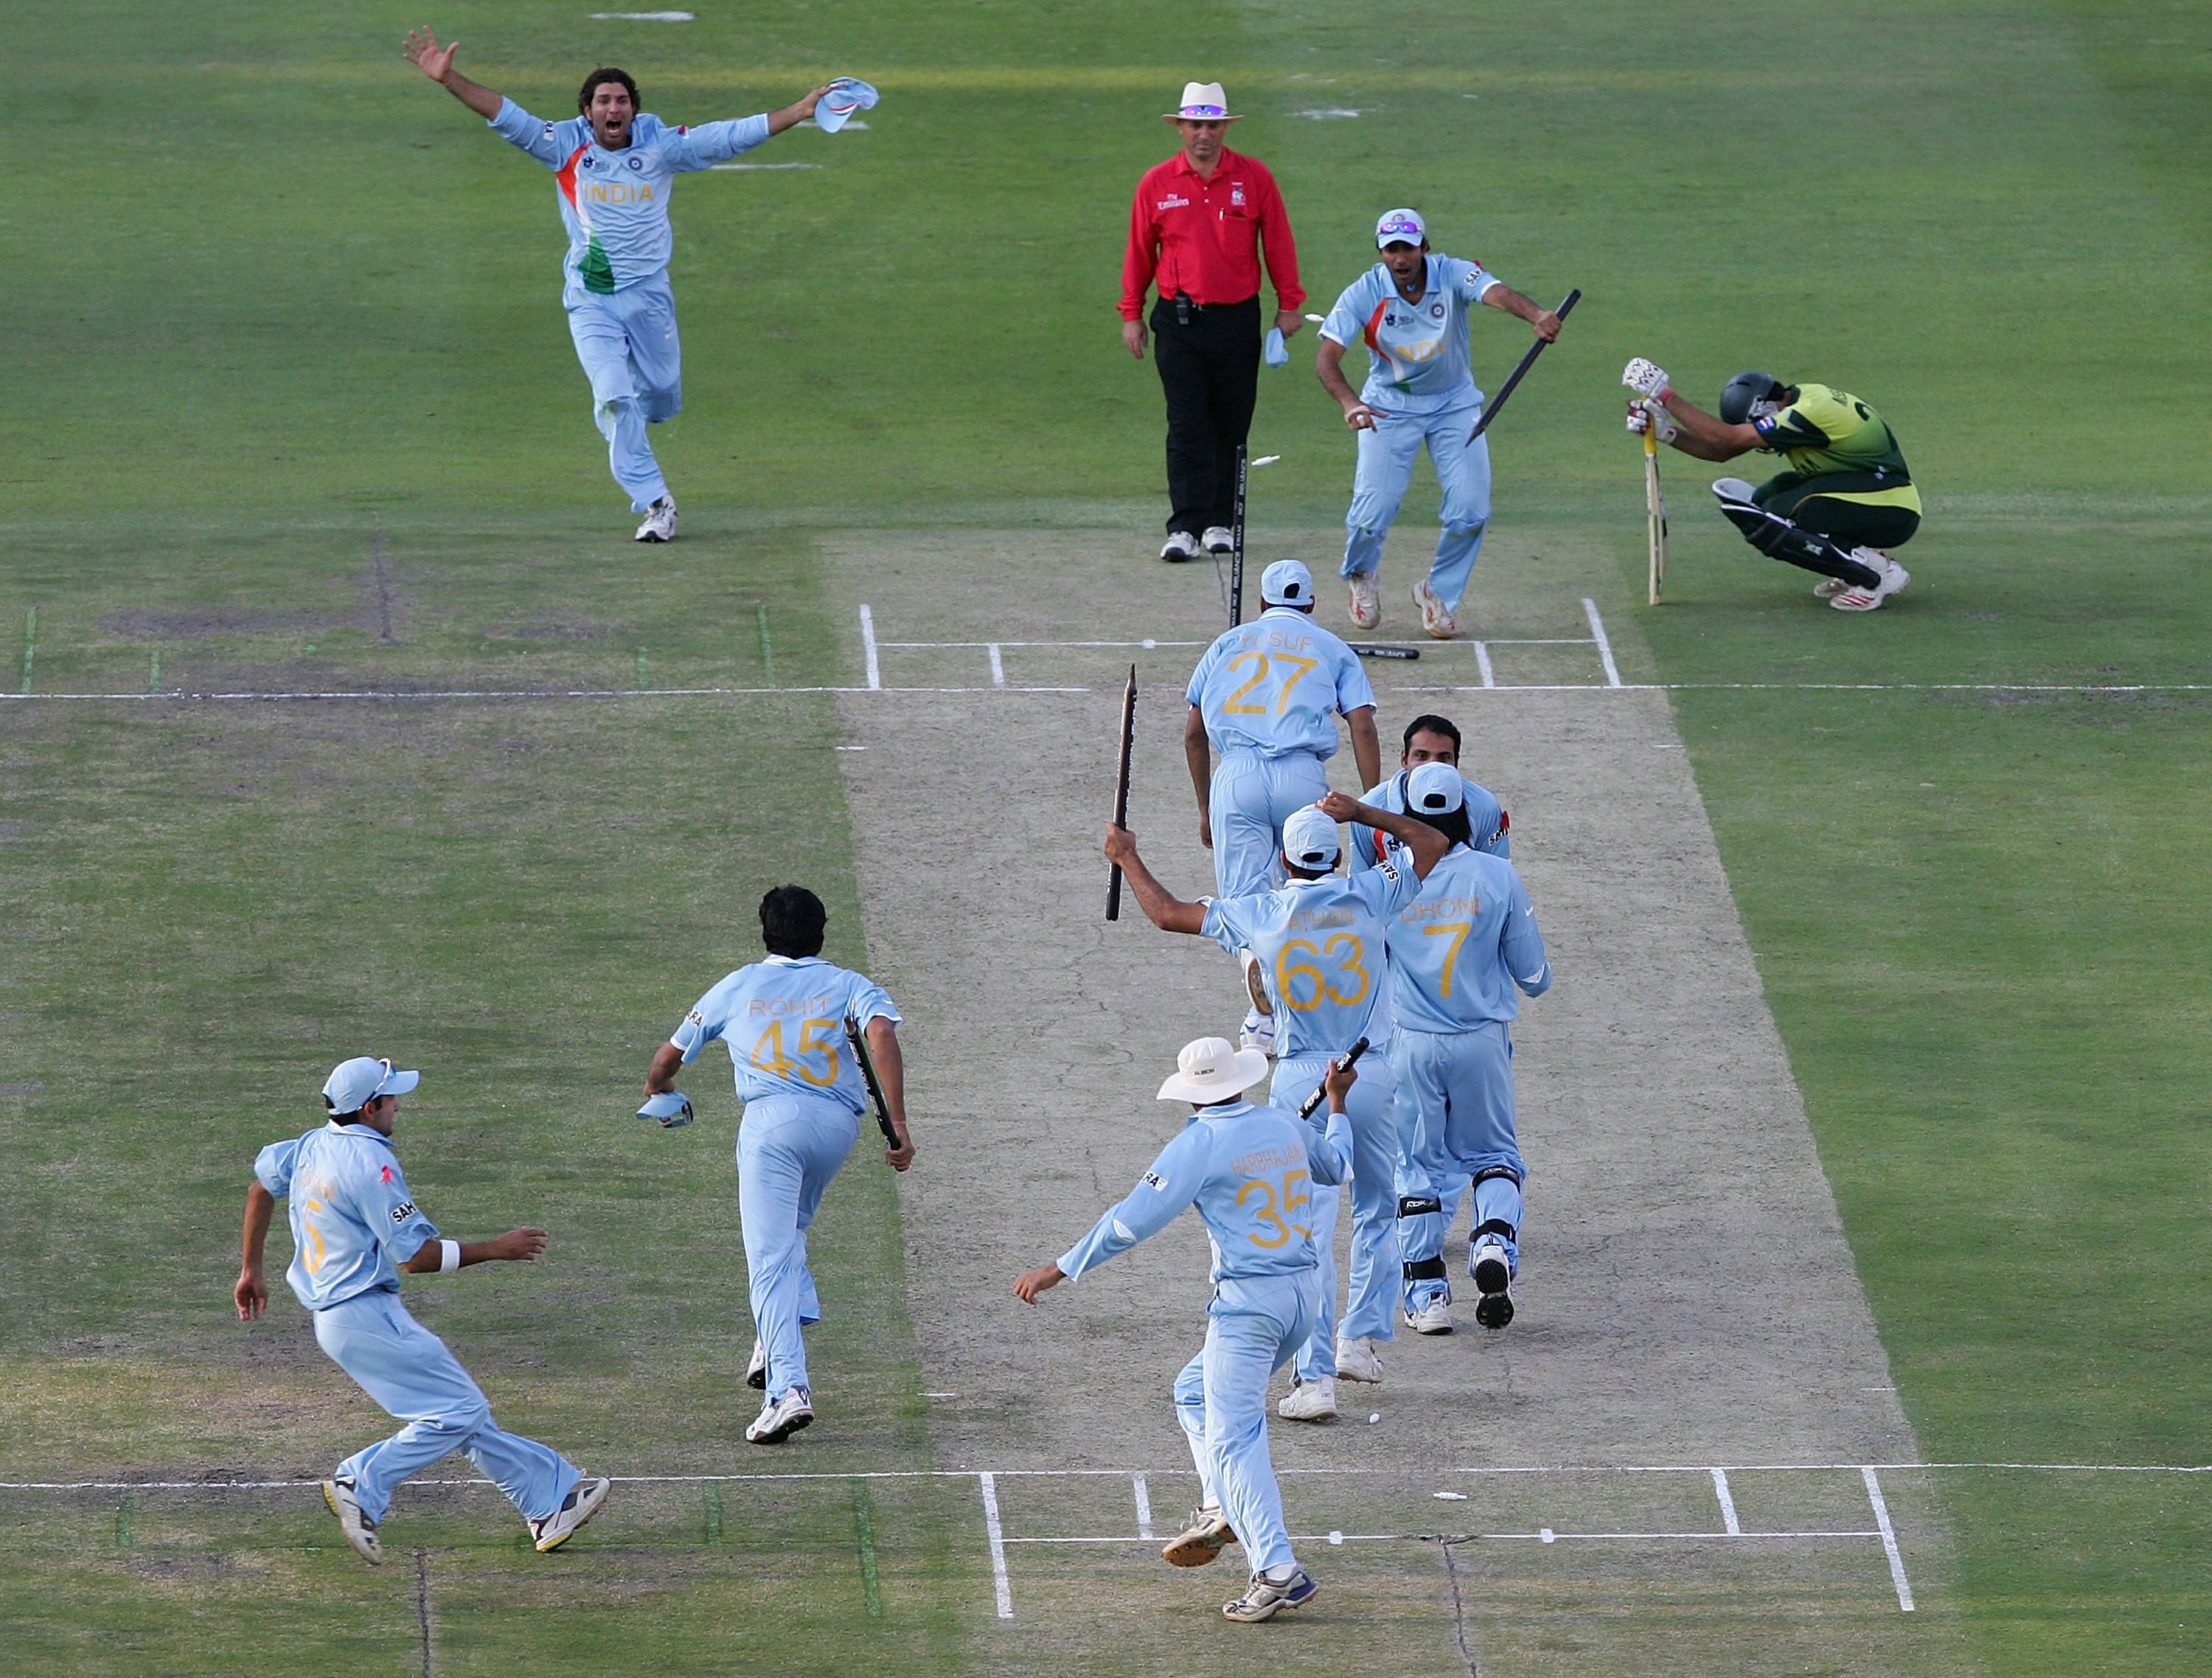 2007 T20 World Cup final – A night that changed the course of Indian cricket